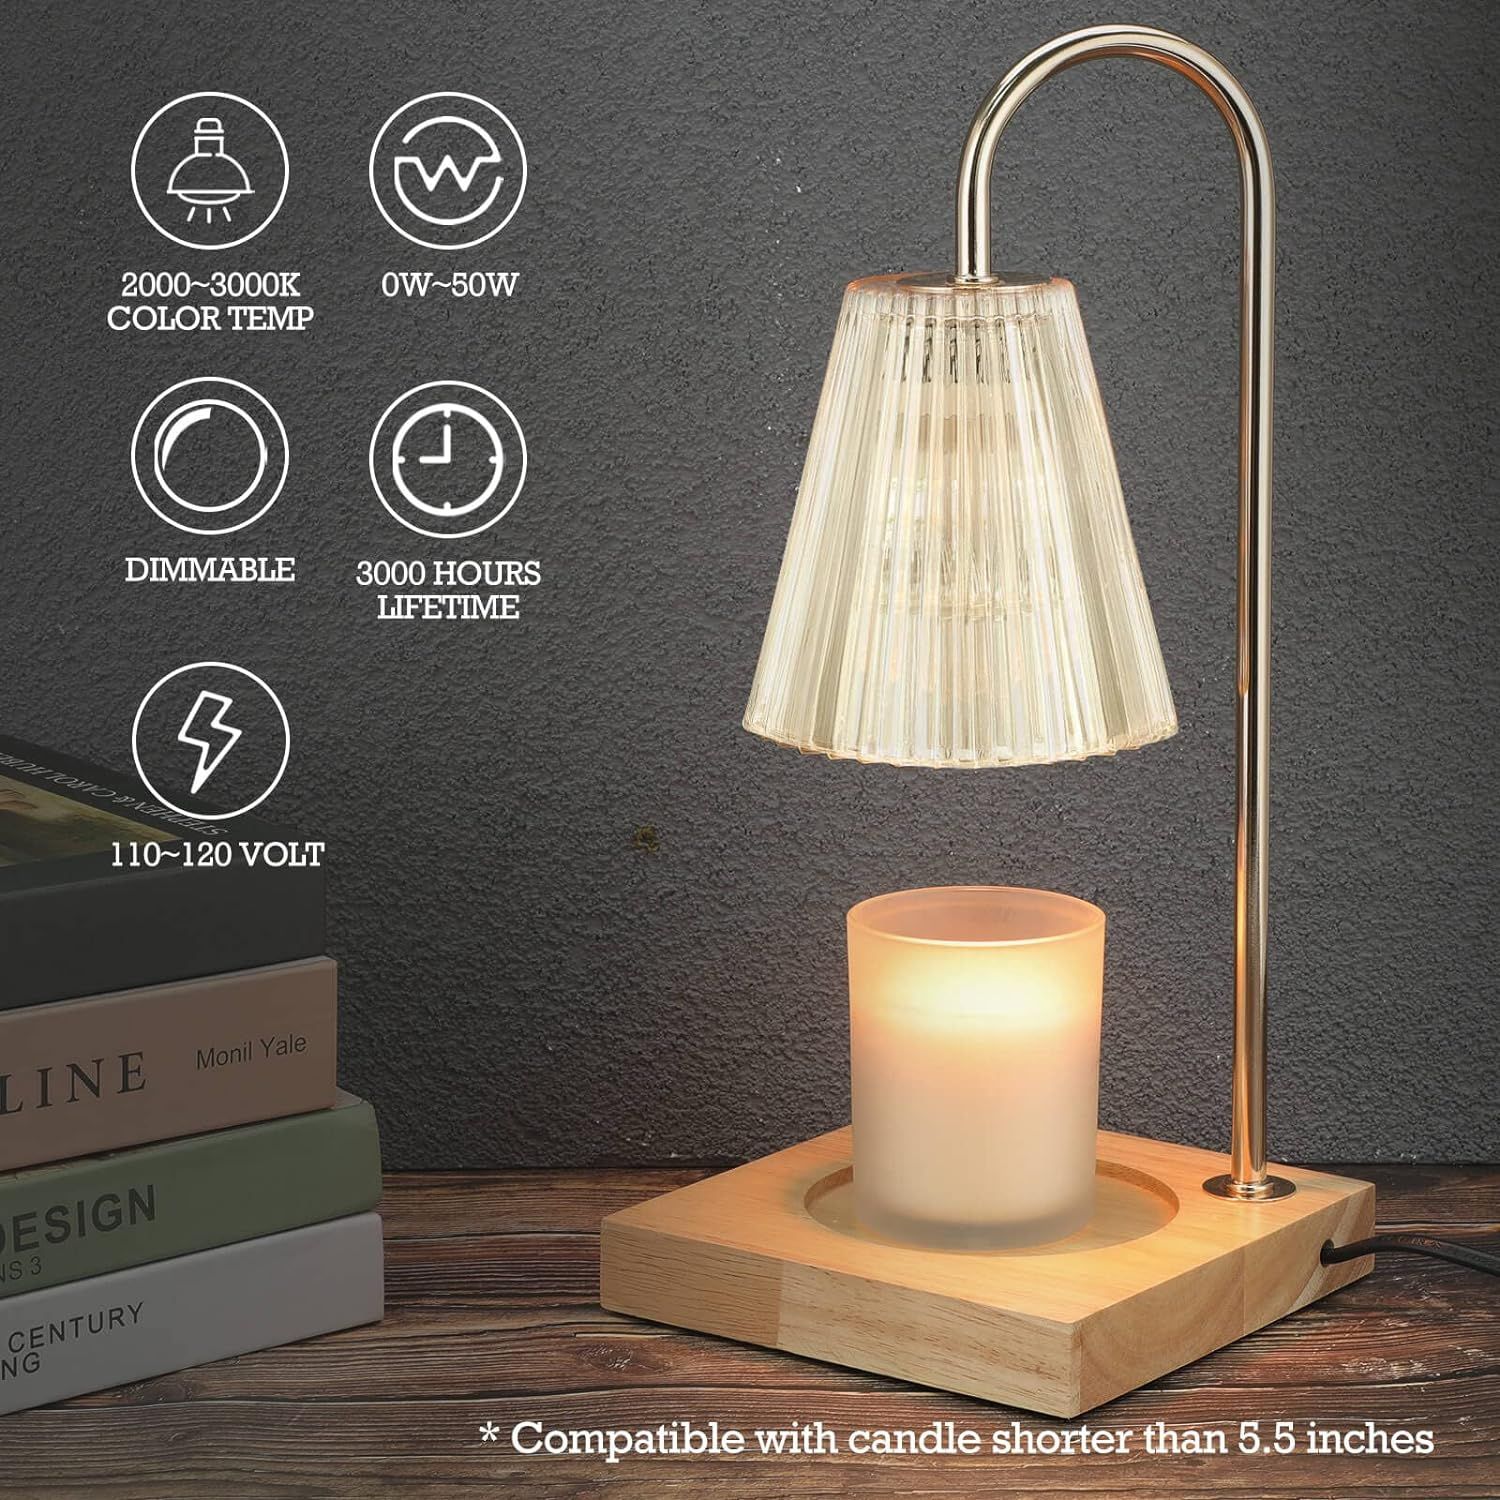 luzdiosa Candle Warmer Lamp with 2 Bulbs Compatible with Jar Vintage Electric Dimmable Candle Mel... | Amazon (US)